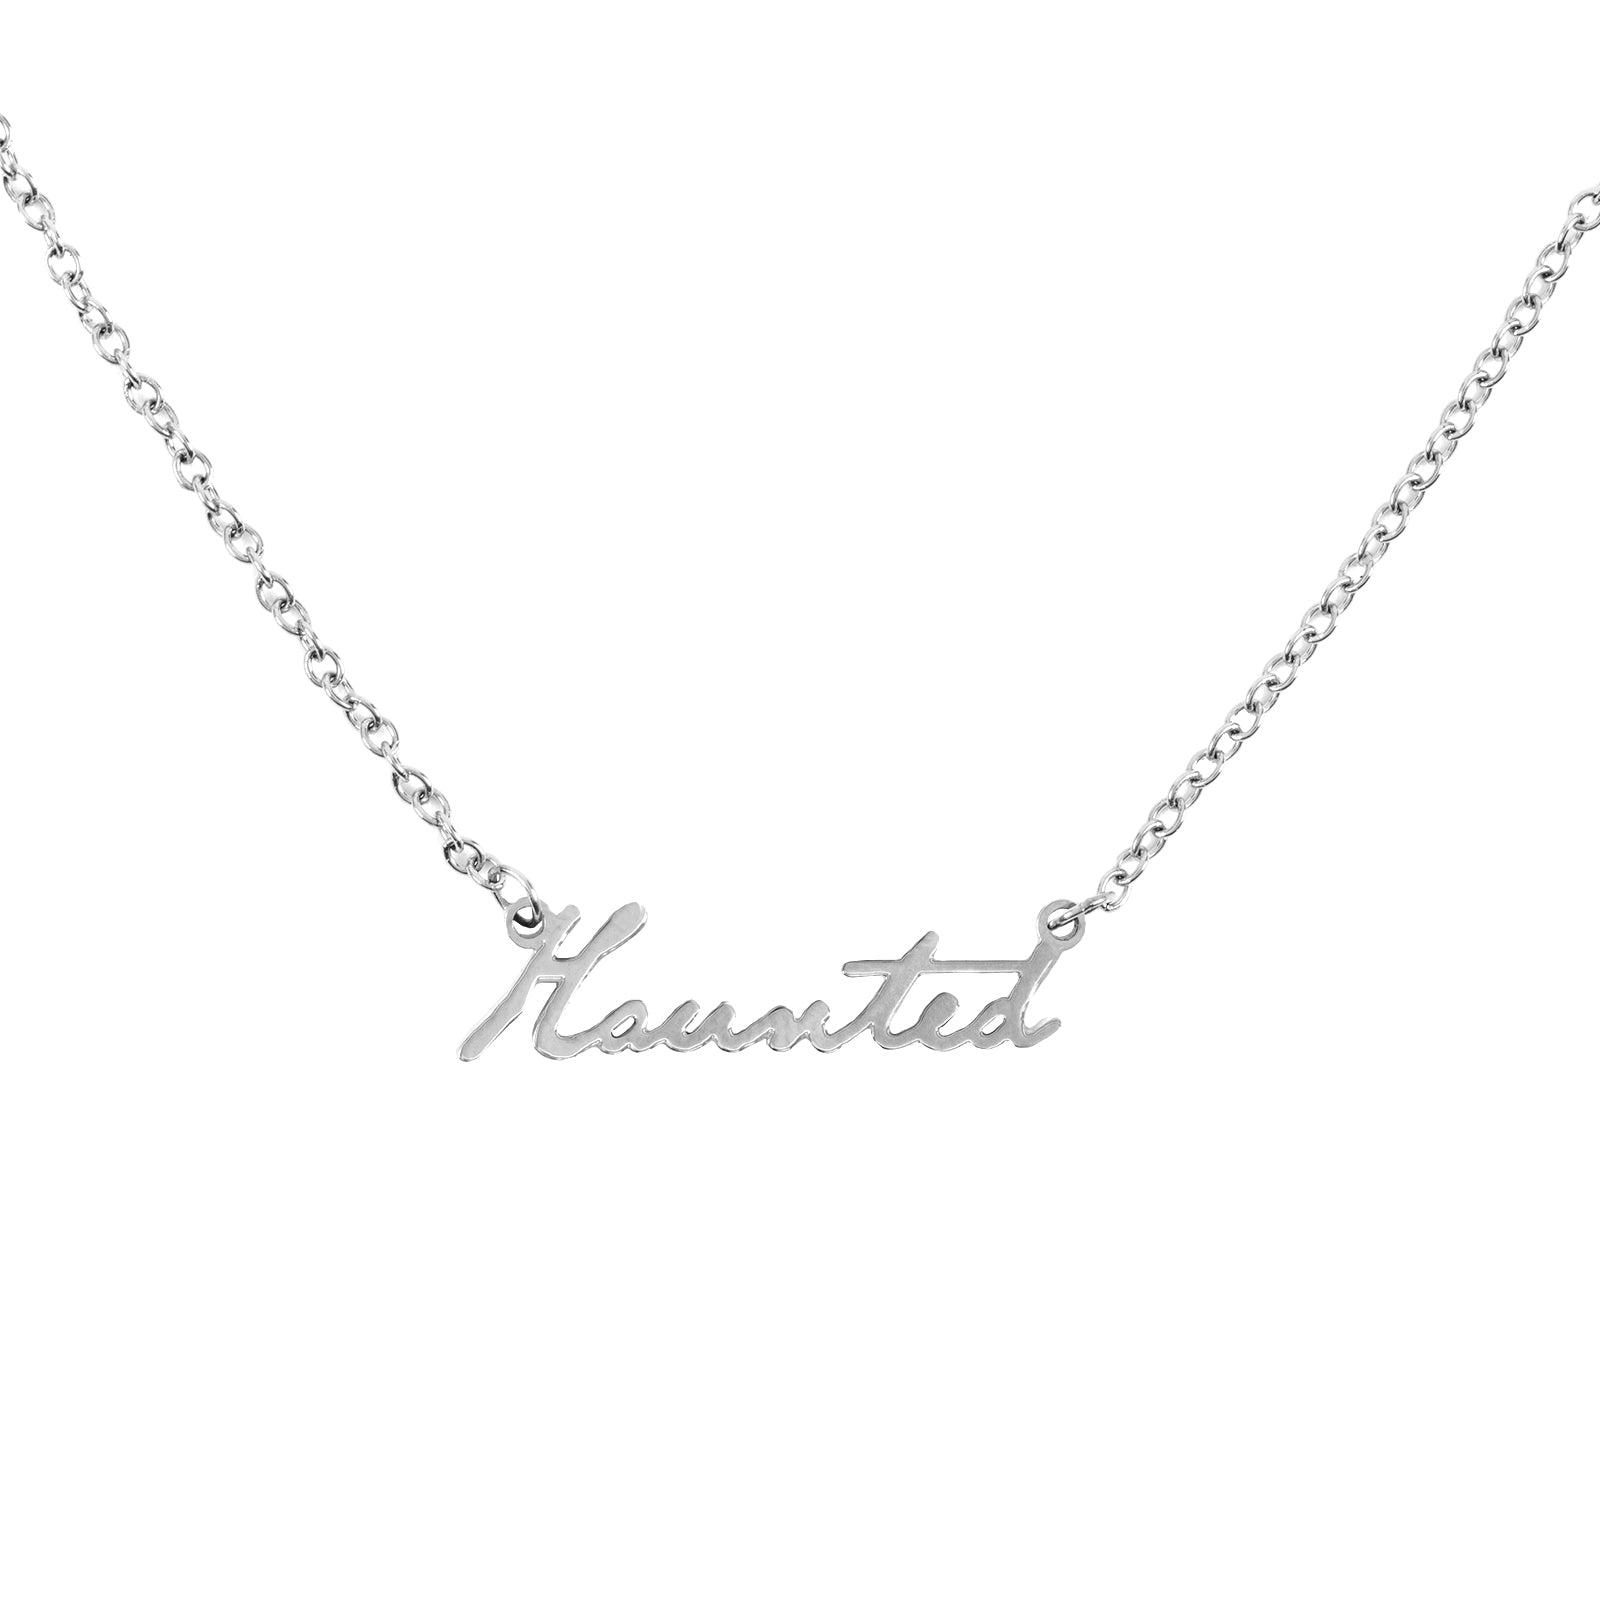 Haunted Stainless Steel Necklace